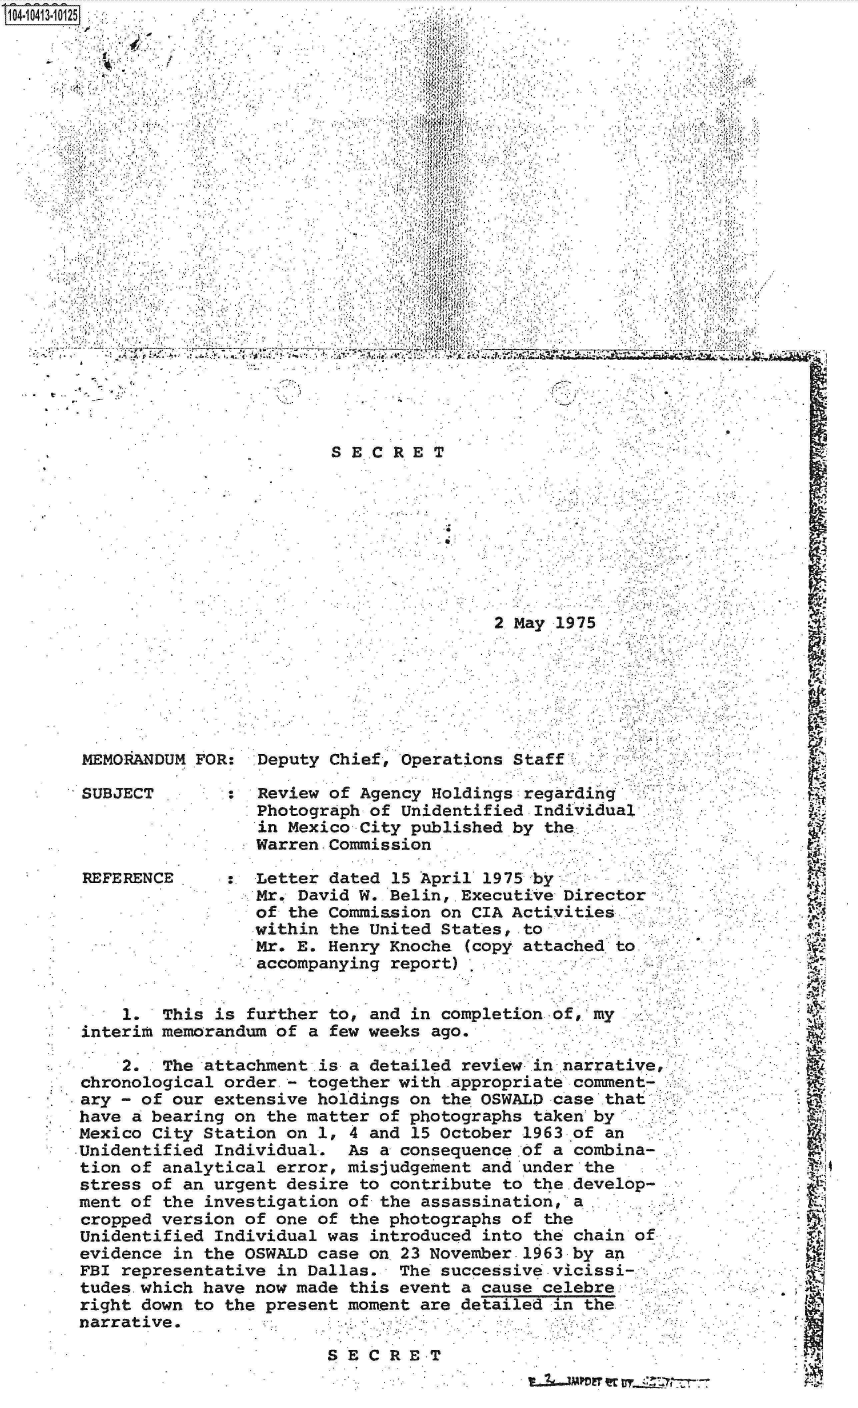 handle is hein.jfk/jfkarch19485 and id is 1 raw text is: 104-1 041 3-10125                      .*.;:K2:!












                                      CRT
            4                        ,1


















                                               2 May 1975






       MEMORANDUM FOR:  Deputy Chief, Operations Staff

       SUBJECT          Review of Agency Holdings regarding
                        Photograph of Unidentified Individual
                        in Mexico City published by the.
                        Warren. Commission .

       REFERENCE        Letter dated 15 April 1975 by
                        Mr. David W. Belin, .Executive Director
                        of the Commission on CIA Activities
                        within the United States, to
                        Mr. E. Henry Knoche (copy attached to
                        accompanying report)


           1.  This is further to, and in completion of, mi
       interim memorandum of a few weeks ago.

           2.  The attachment .is a detailed review in narrative,
       chronological order - together with .appropriate comment-
       ary - of our extensive holdings on the OSWALD case .that
       have a bearing on the matter of photographs taken by
       Mexico City Station on 1, 4 and 15 October 1963 of an
       Unidentified Individual.  As a consequence of a combina-
       tion of analytical error, misjudgement and under the
       stress of an urgent desire to contribute to the.develop-
       ment of the investigation of the assassination, a
       cropped version of one of the photographs of the
       Unidentified Individual was introduced into the chain o
       evidence in the OSWALD case ont23 November 1963 by an
       FBI representative in Dallas.  The successive .vicissi- .
       tudes which have now made this event a cause celebre
       right down to the present moment are detailed in the
       narrative.

                               SECRET
                                                  ,  .  r    .  - -


